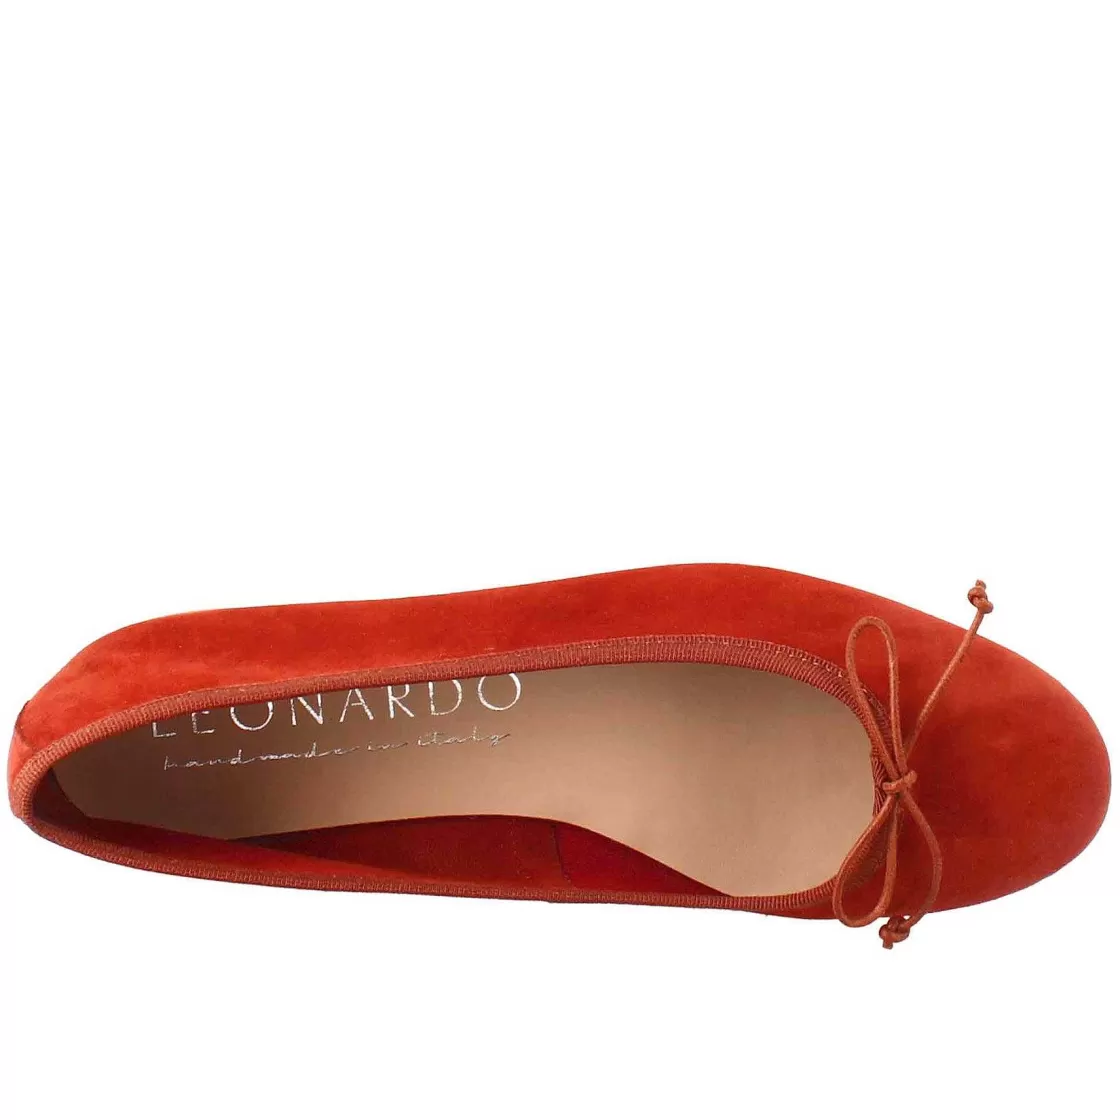 Leonardo Light Brick-Colored Women'S Ballet Flats In Suede Without Lining Best